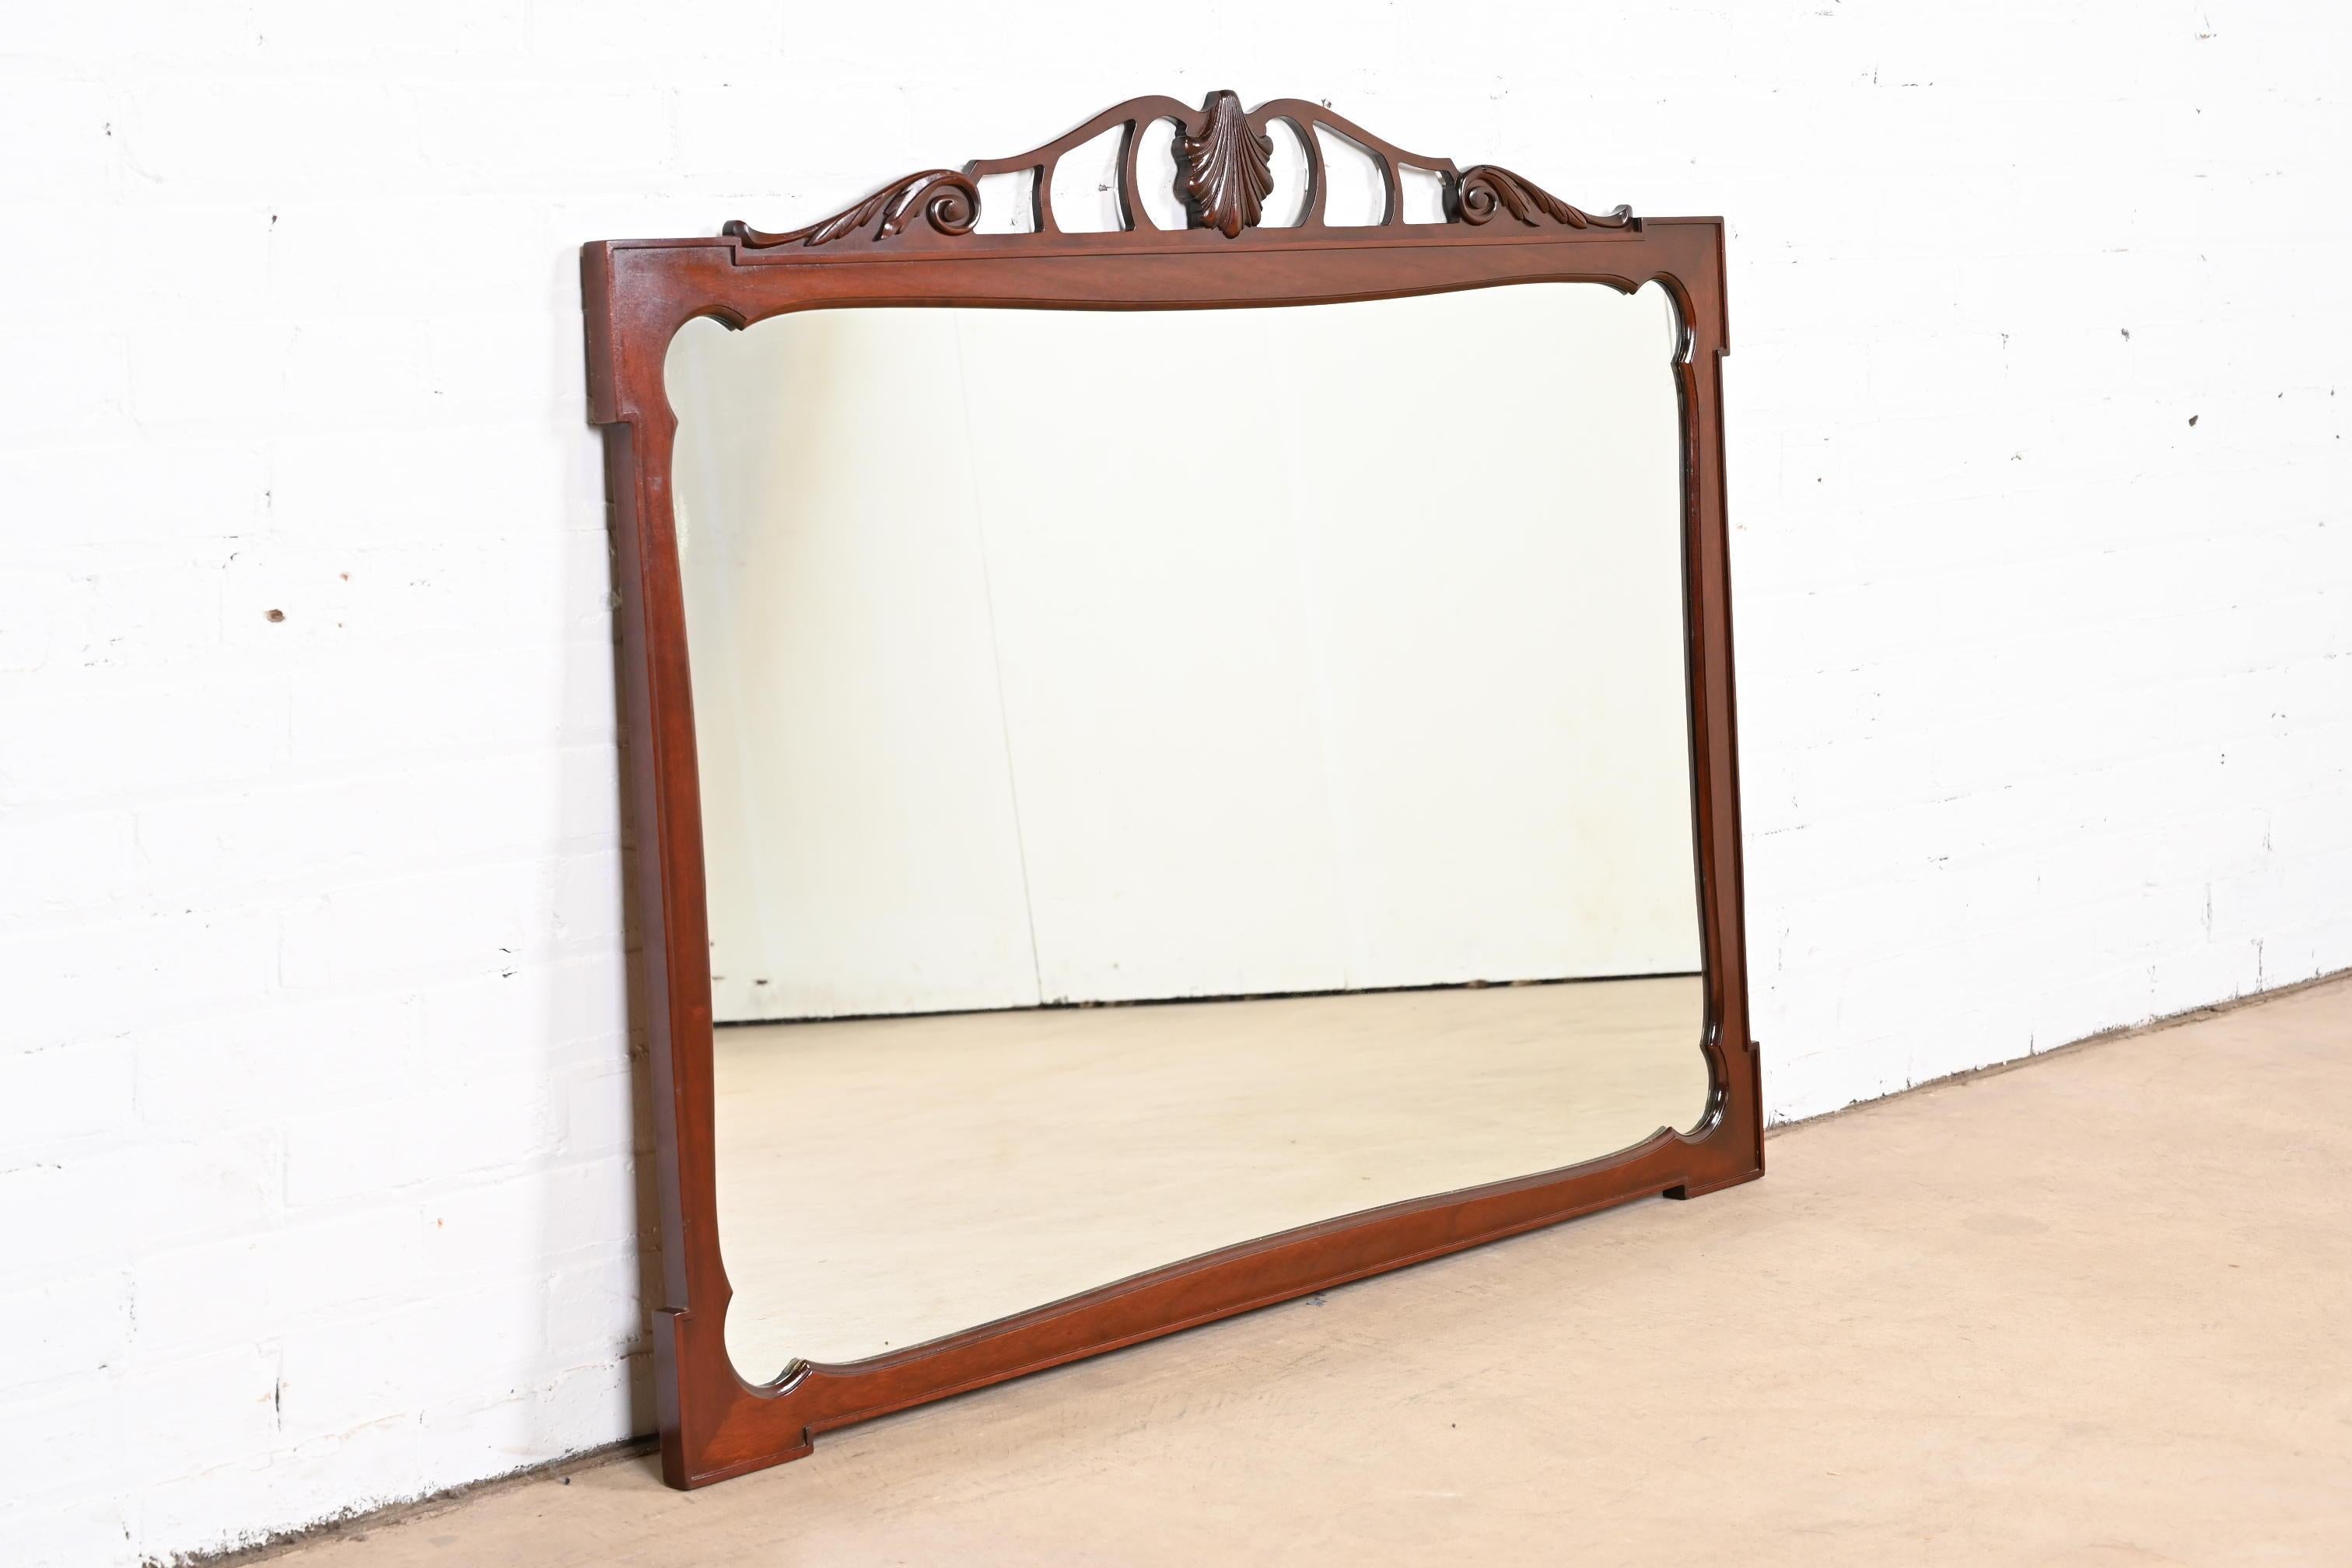 A stylish traditional Georgian style carved mahogany framed wall mirror

USA, Mid-20th century

Measures: 47.25